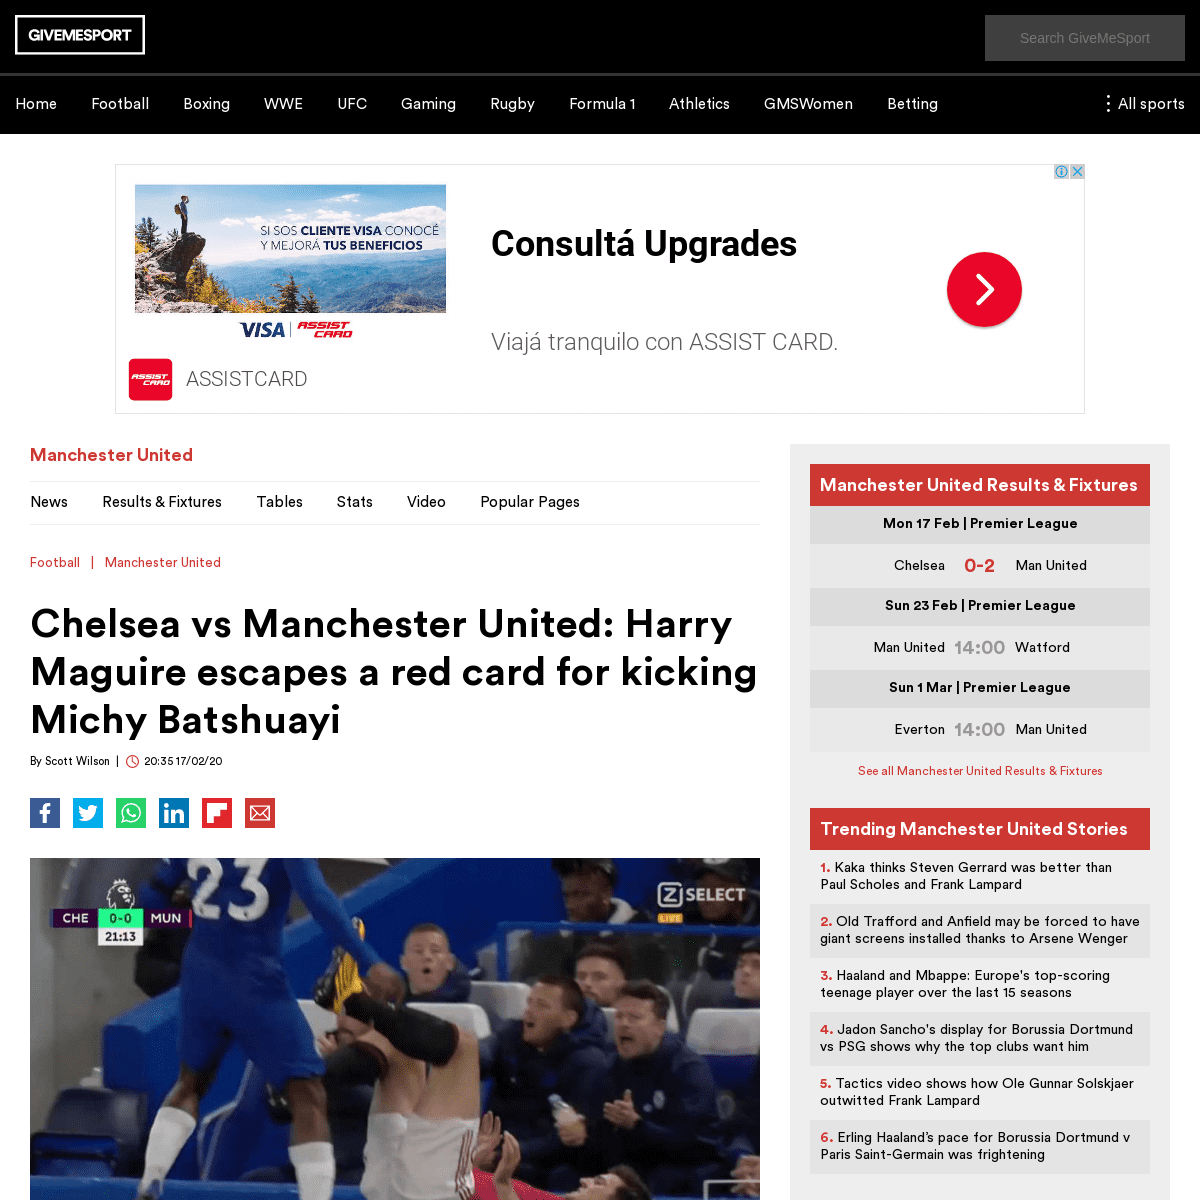 A complete backup of www.givemesport.com/1547778-chelsea-vs-manchester-united-harry-maguire-escapes-a-red-card-for-kicking-michy